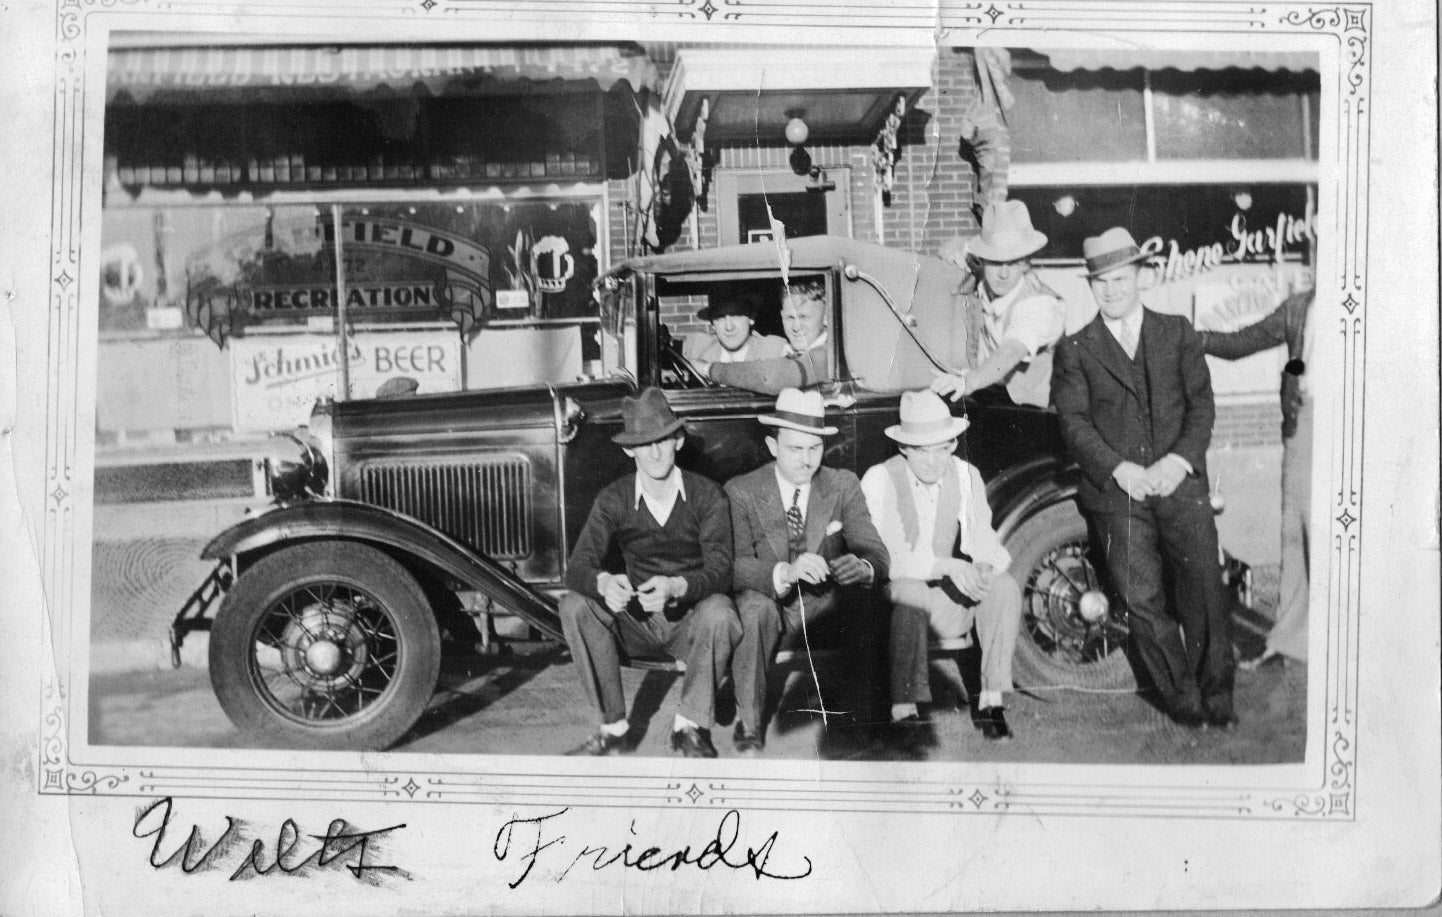 Craig Kwiatkowski’s Uncle Wally Baczkowski and friends pose in front of Garfield Recreation likely around the 1930’s. Garfield Recreation is one of the local businesses included in the recovered promotional table.